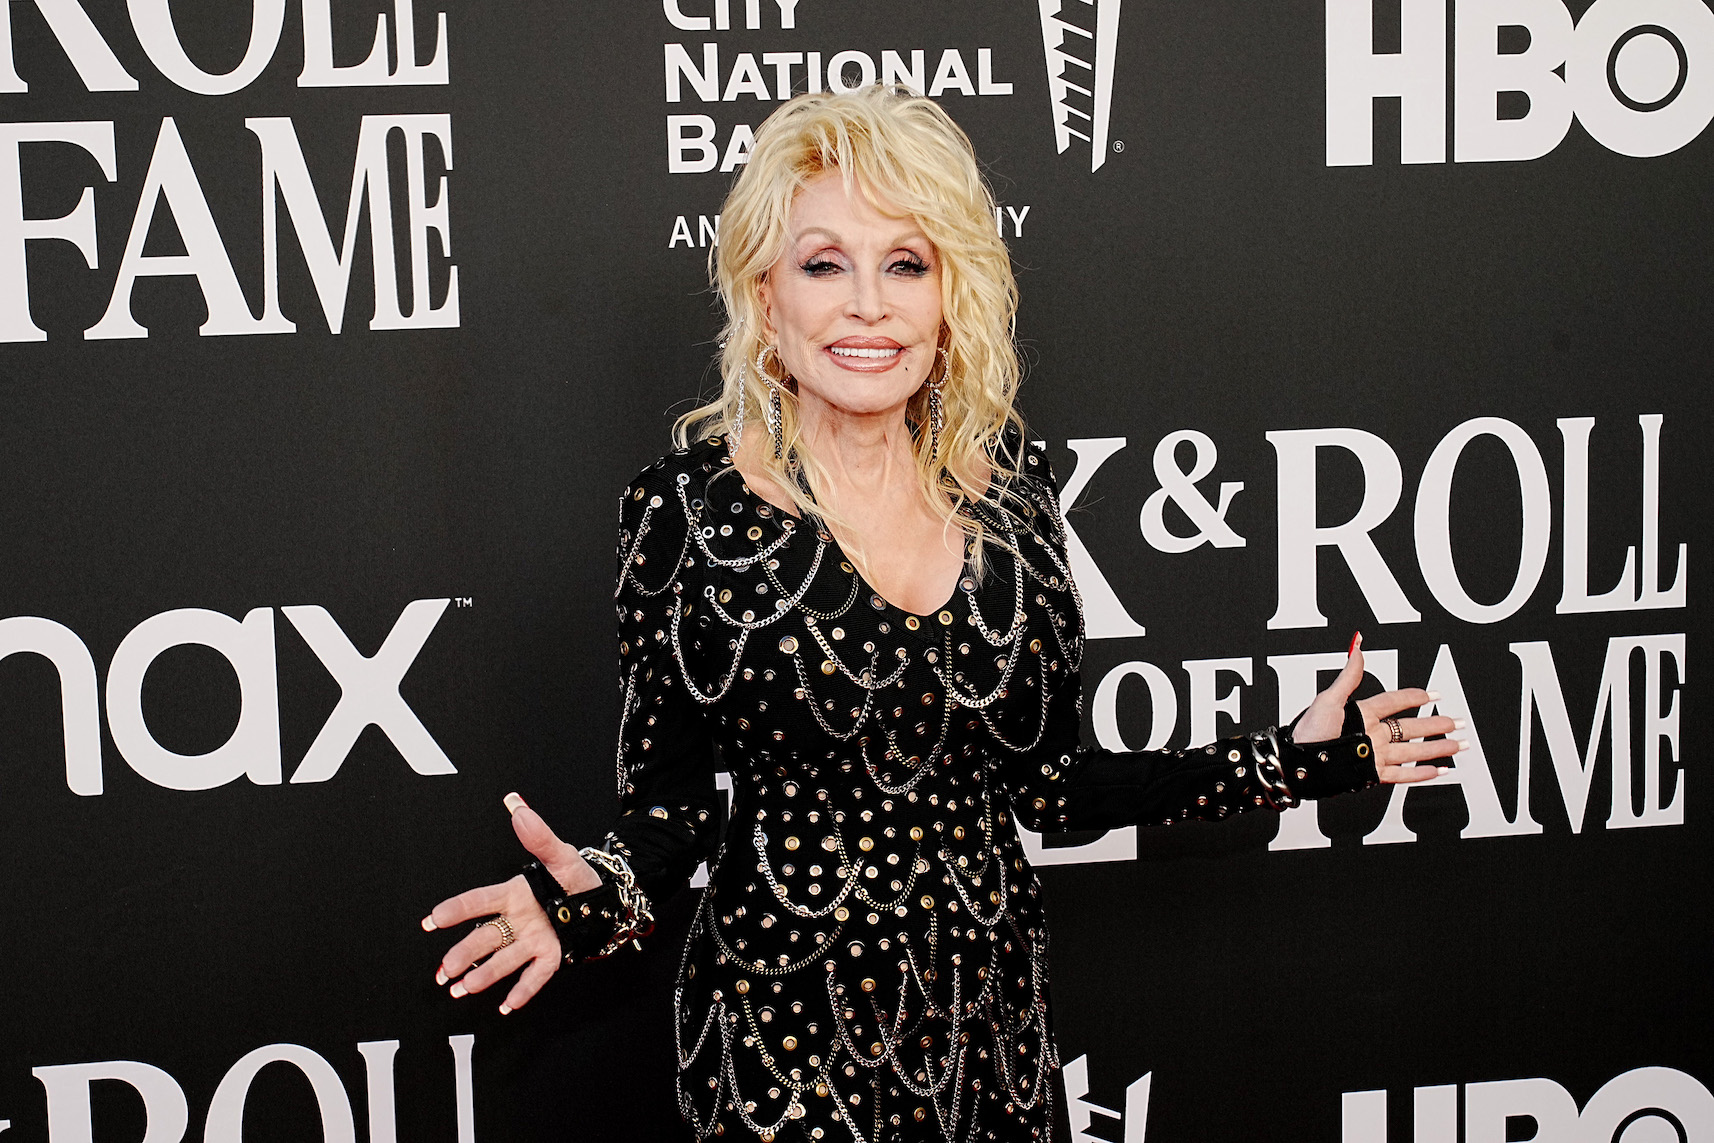 Dolly Parton attends the 37th annual Rock and Roll Hall of Fame Induction Ceremony in Los Angeles